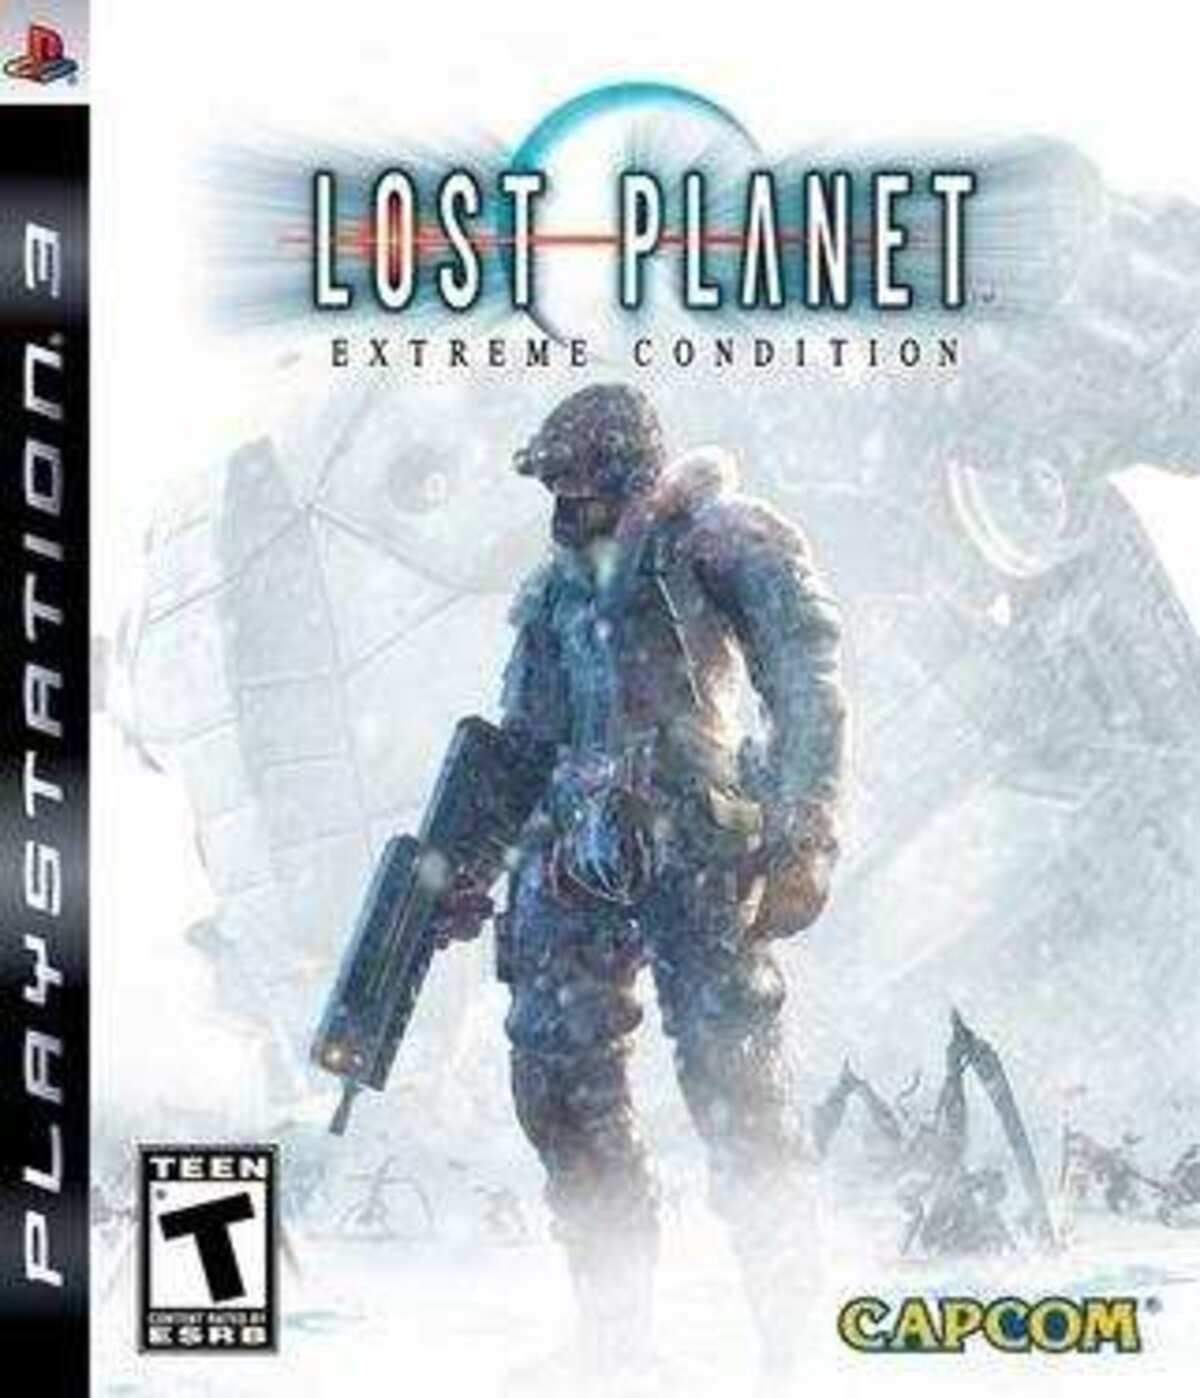 CAPCOM Ps3 Lost Planet Extreme Condition